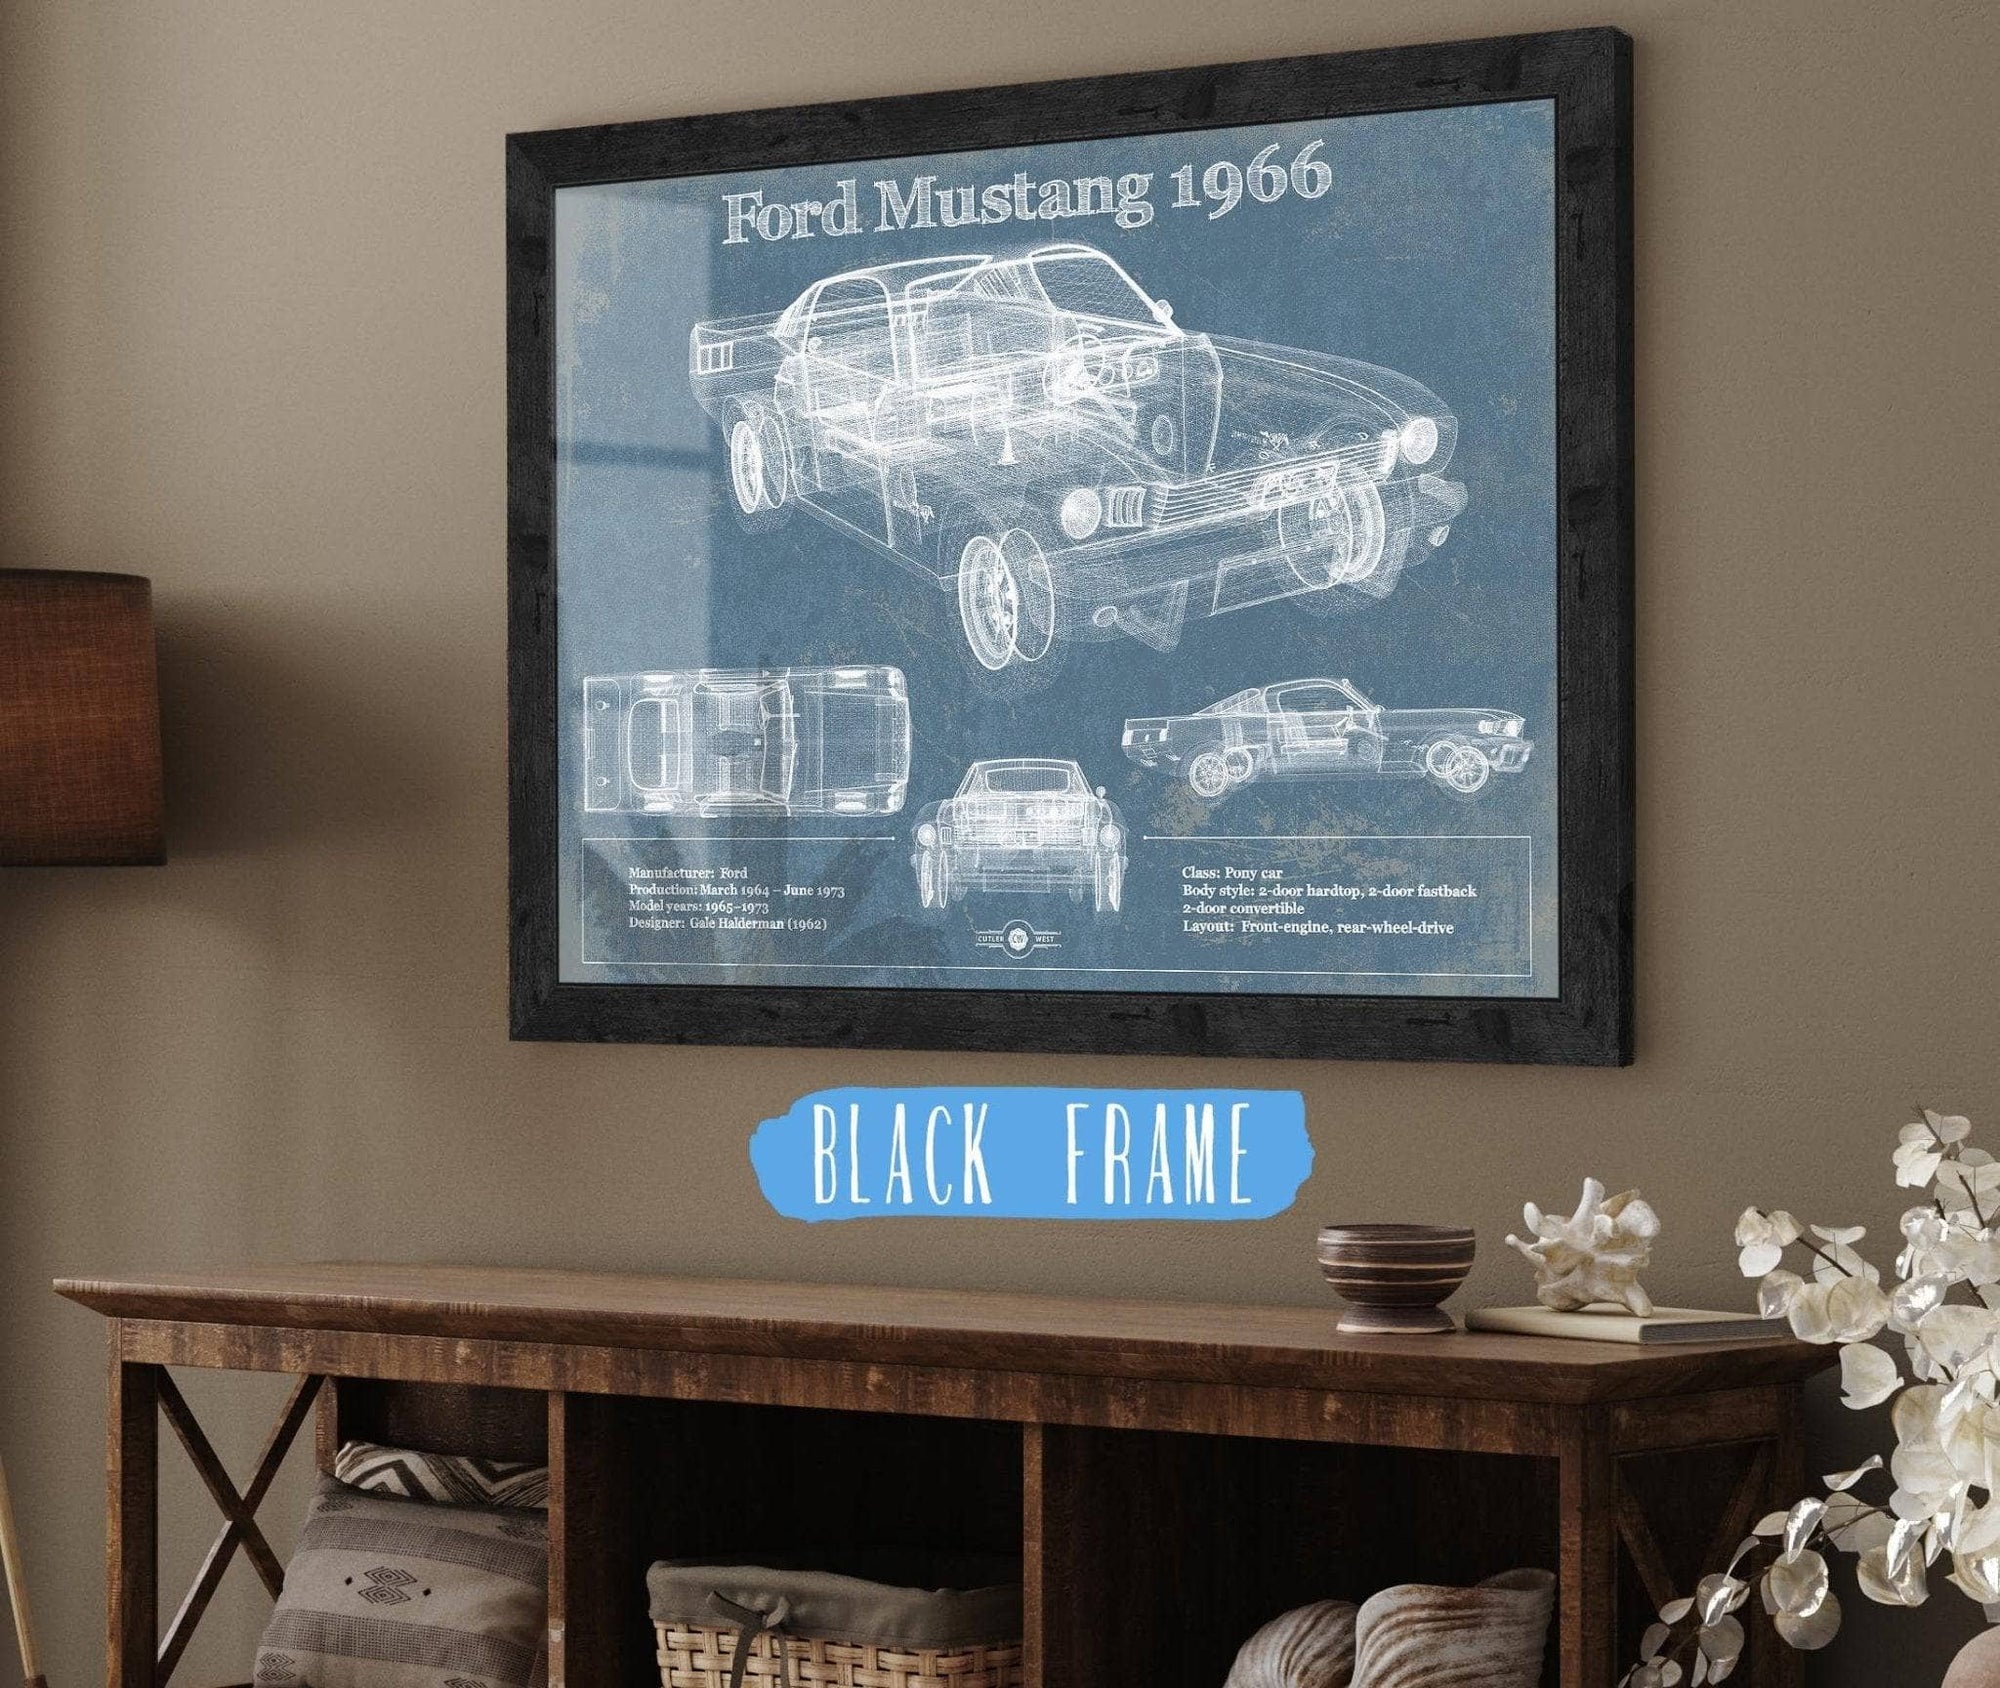 Cutler West Ford Collection 14" x 11" / Black Frame Ford Mustang 1966 Original Blueprint Art 845000229-TOP